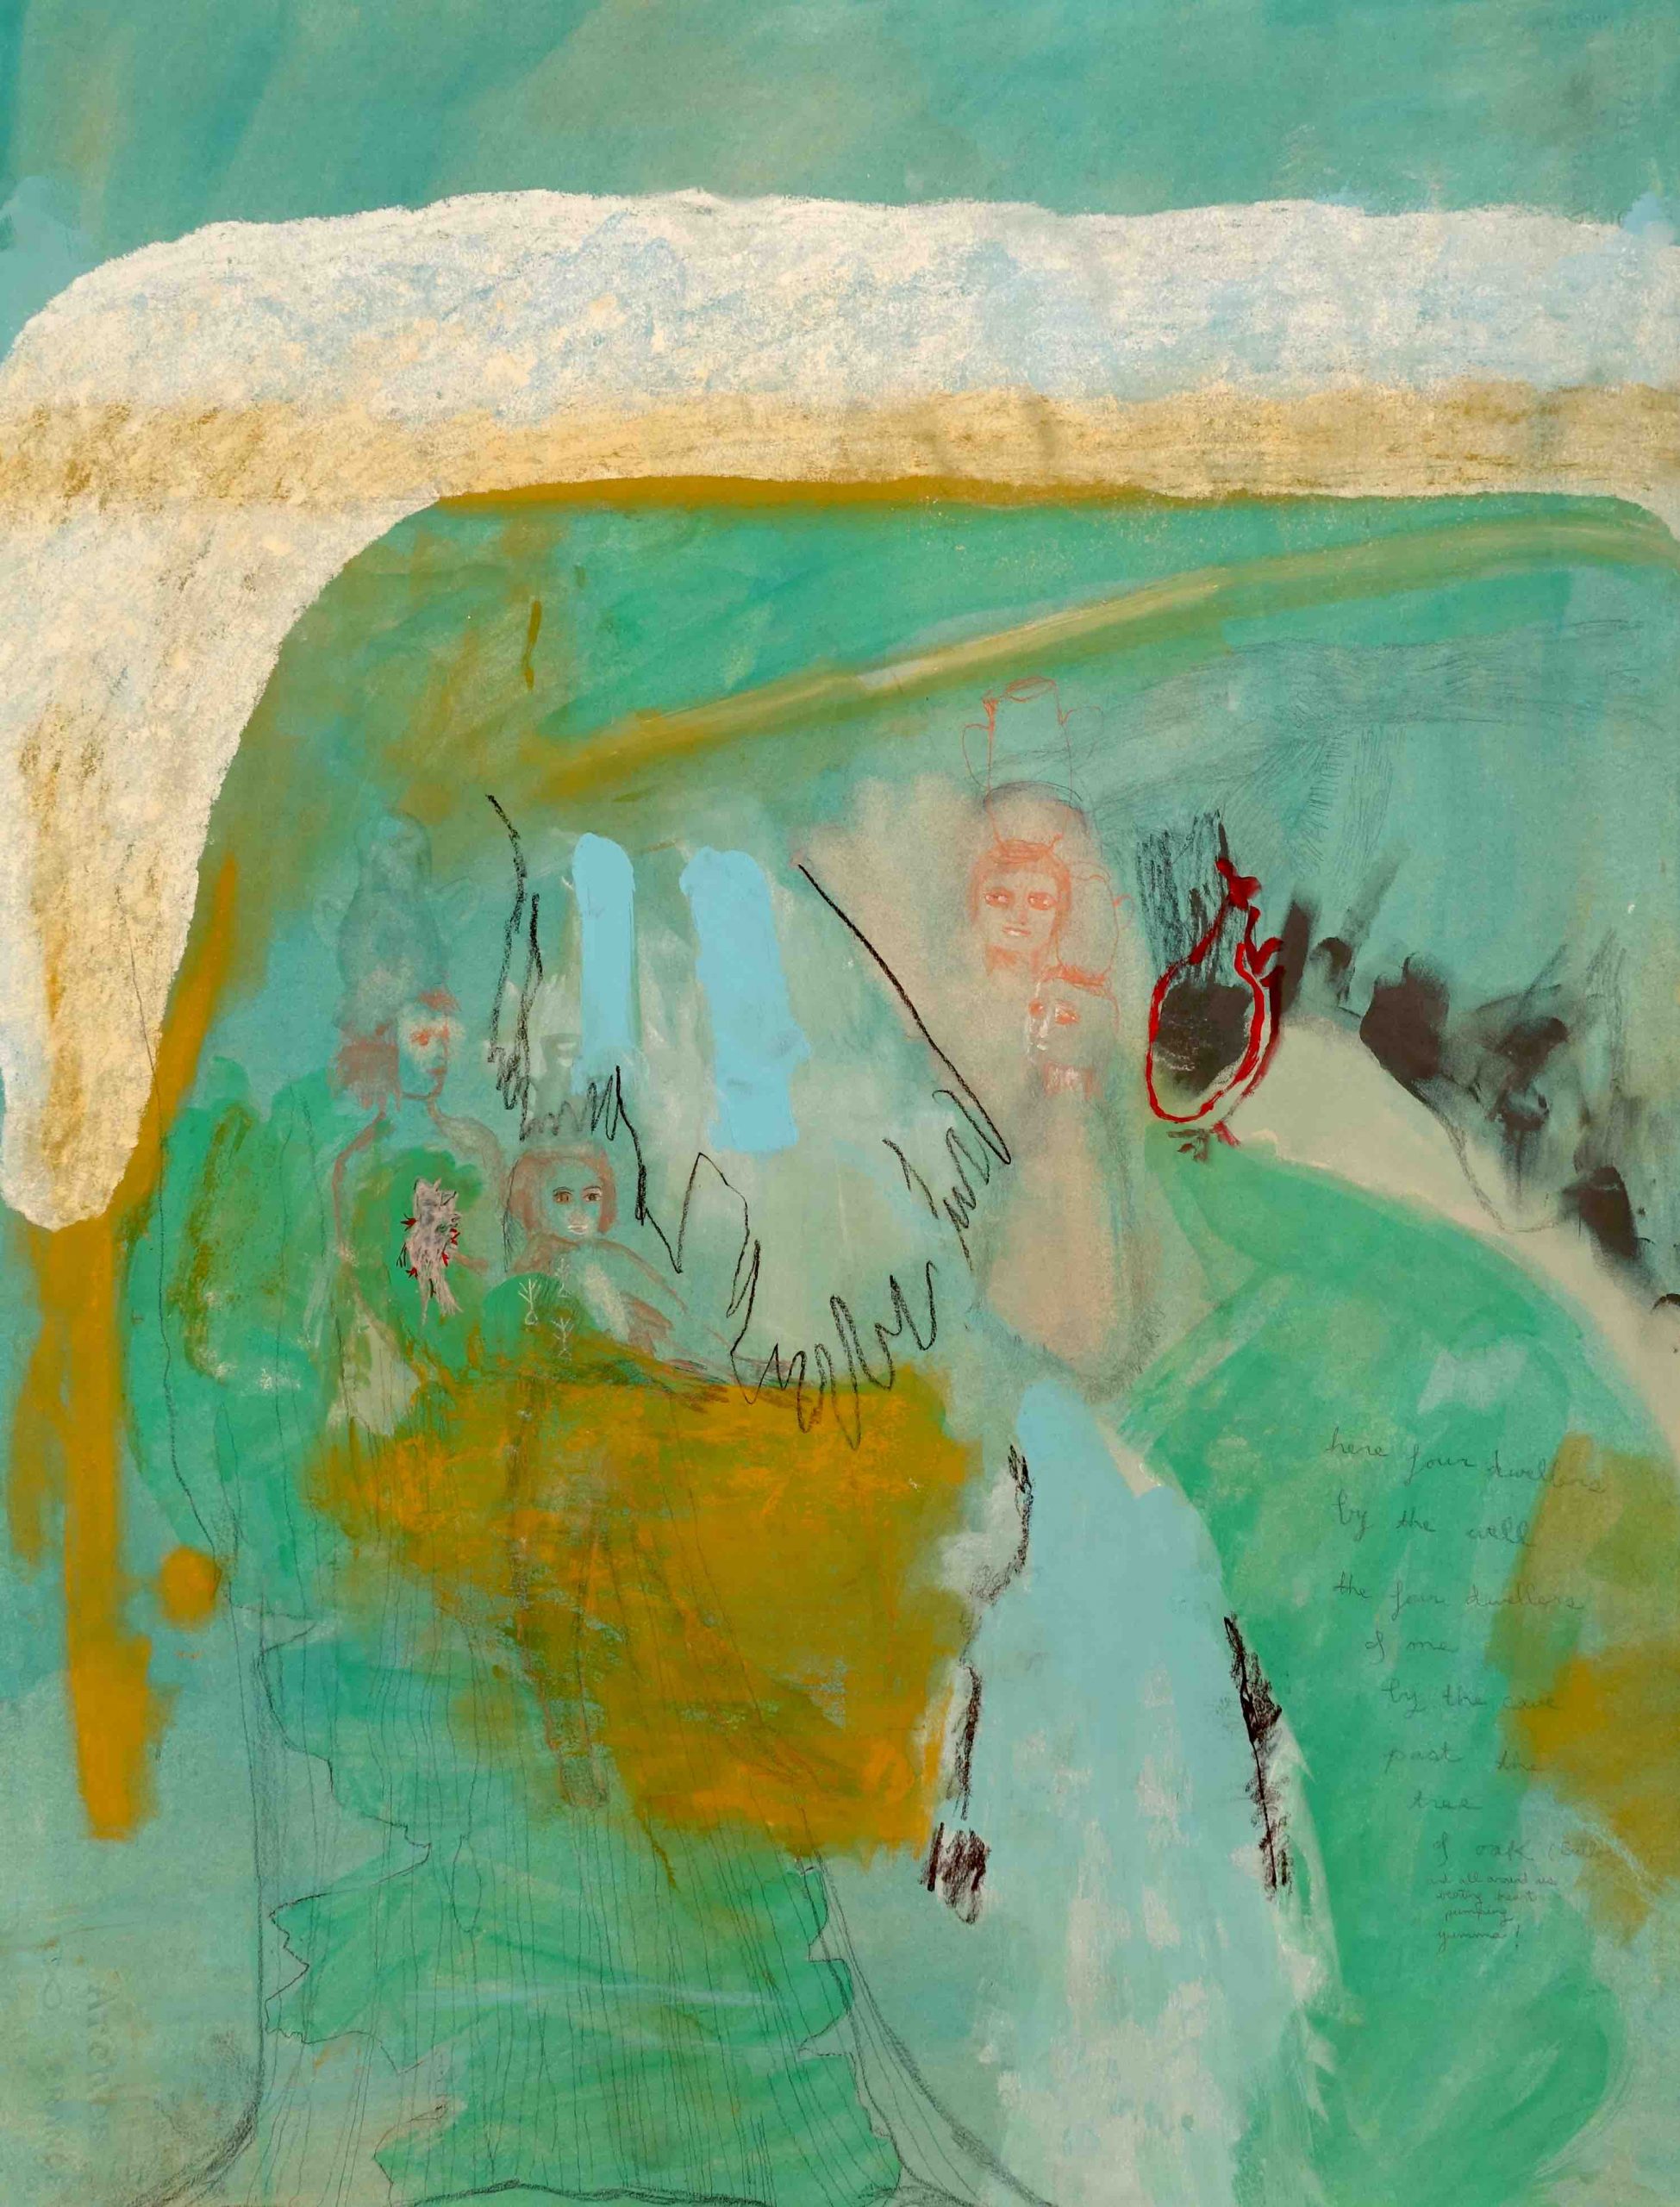 A portrait painting with a vibrant turquoise background over which are sketched several small, delicate figures in red, other organic shapes and textures, handwriting, and washes of mustard yellow and pale blue. The figures, in two pairs, seems to view each other from across a stretch of pale blue that evokes water. One carries a tall vessel on their head, with another heart-like vessel to the side, outlined in vivid red and with a trail of black smudges. Arcing over the whole scene and spanning the full width of the painting is a thick and smoke-like pale strip.